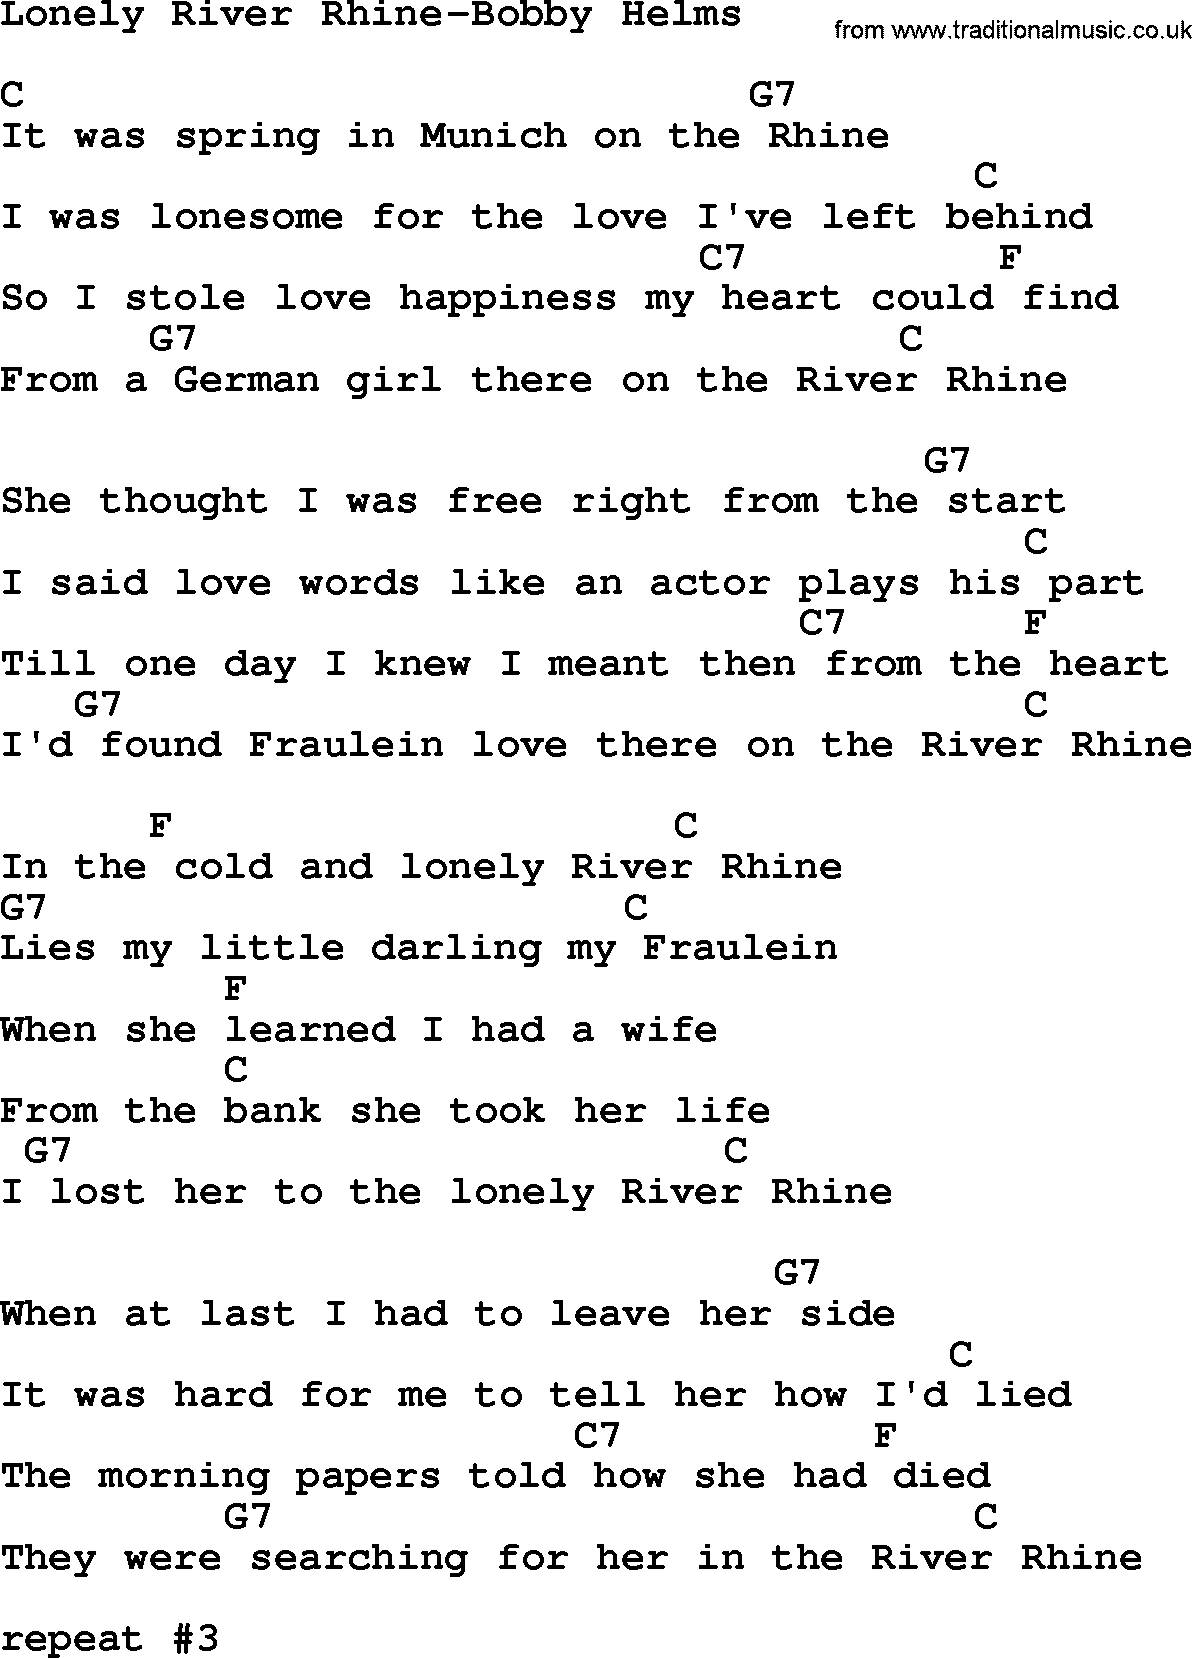 Country music song: Lonely River Rhine-Bobby Helms lyrics and chords